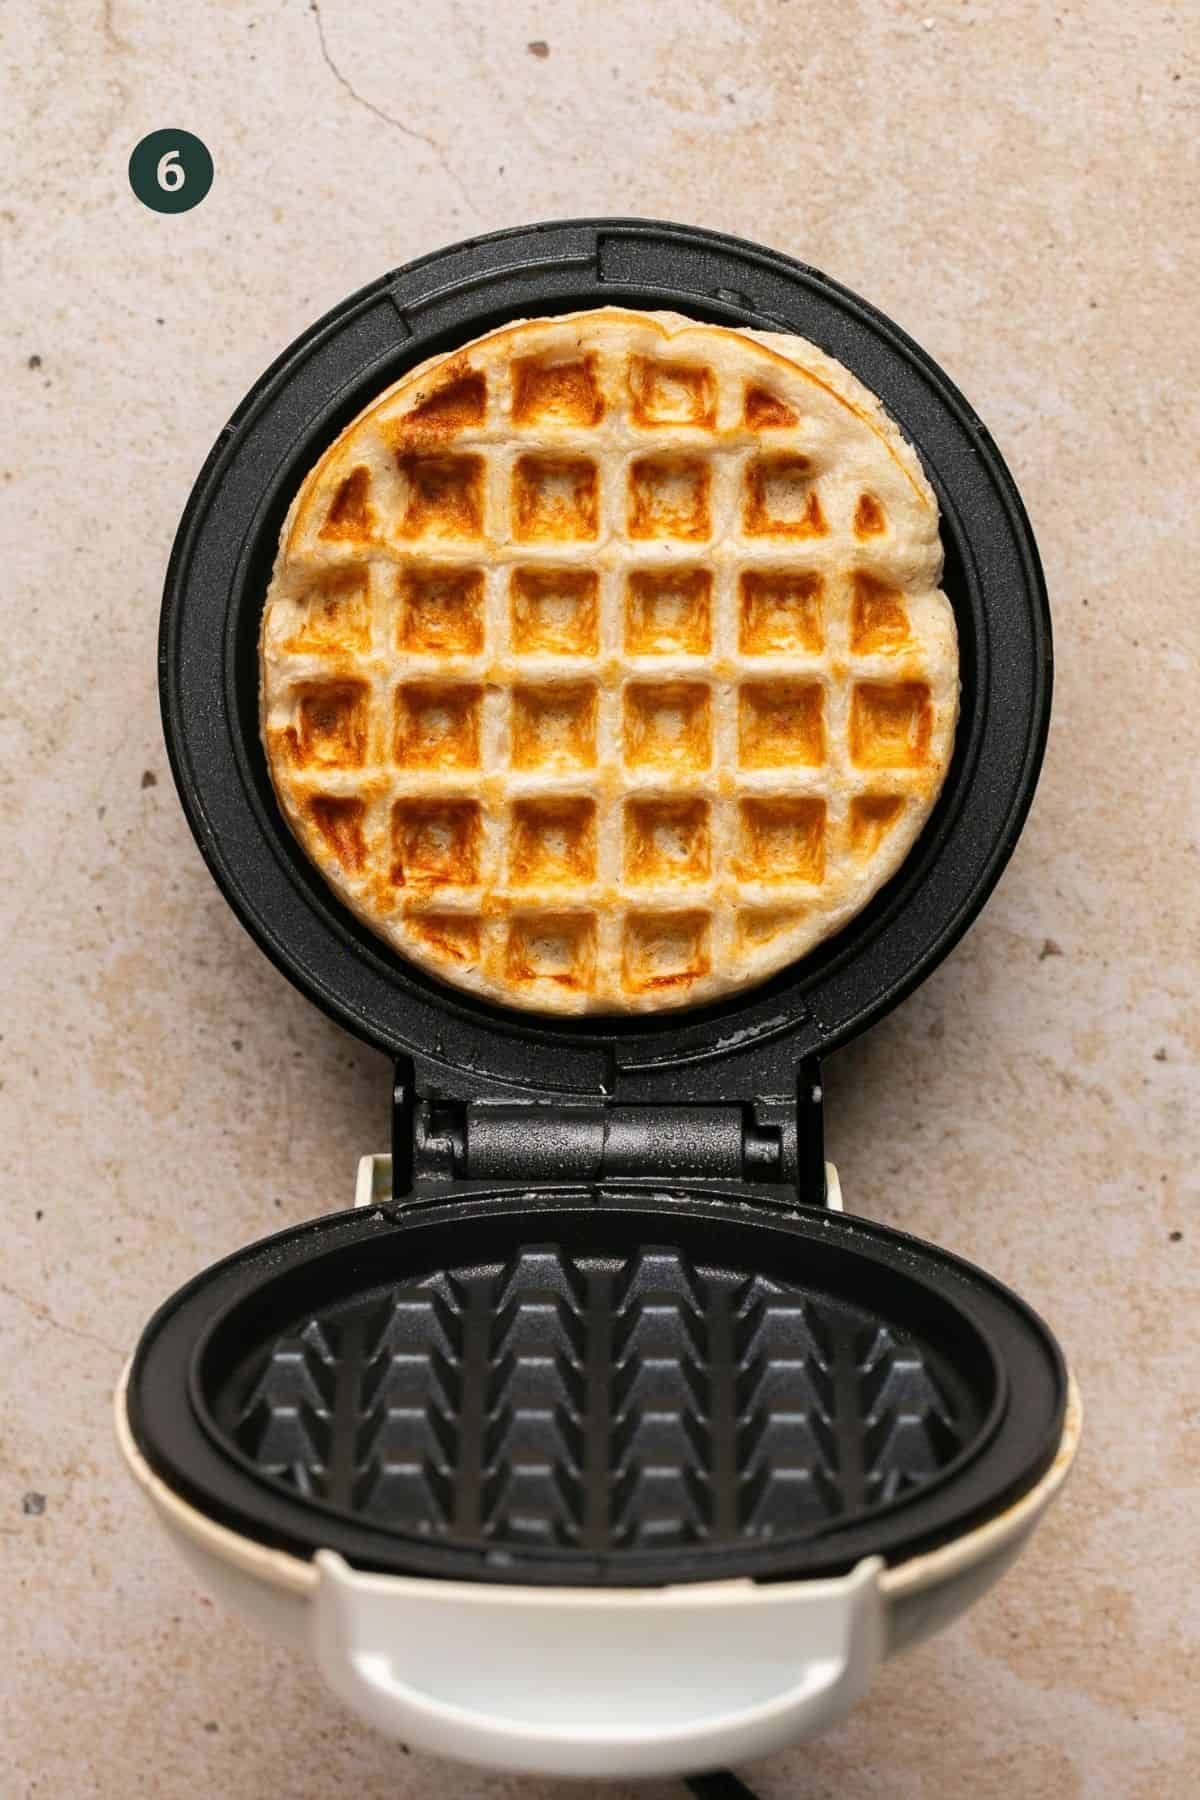 Fully browned and cooked waffle in a waffle maker.